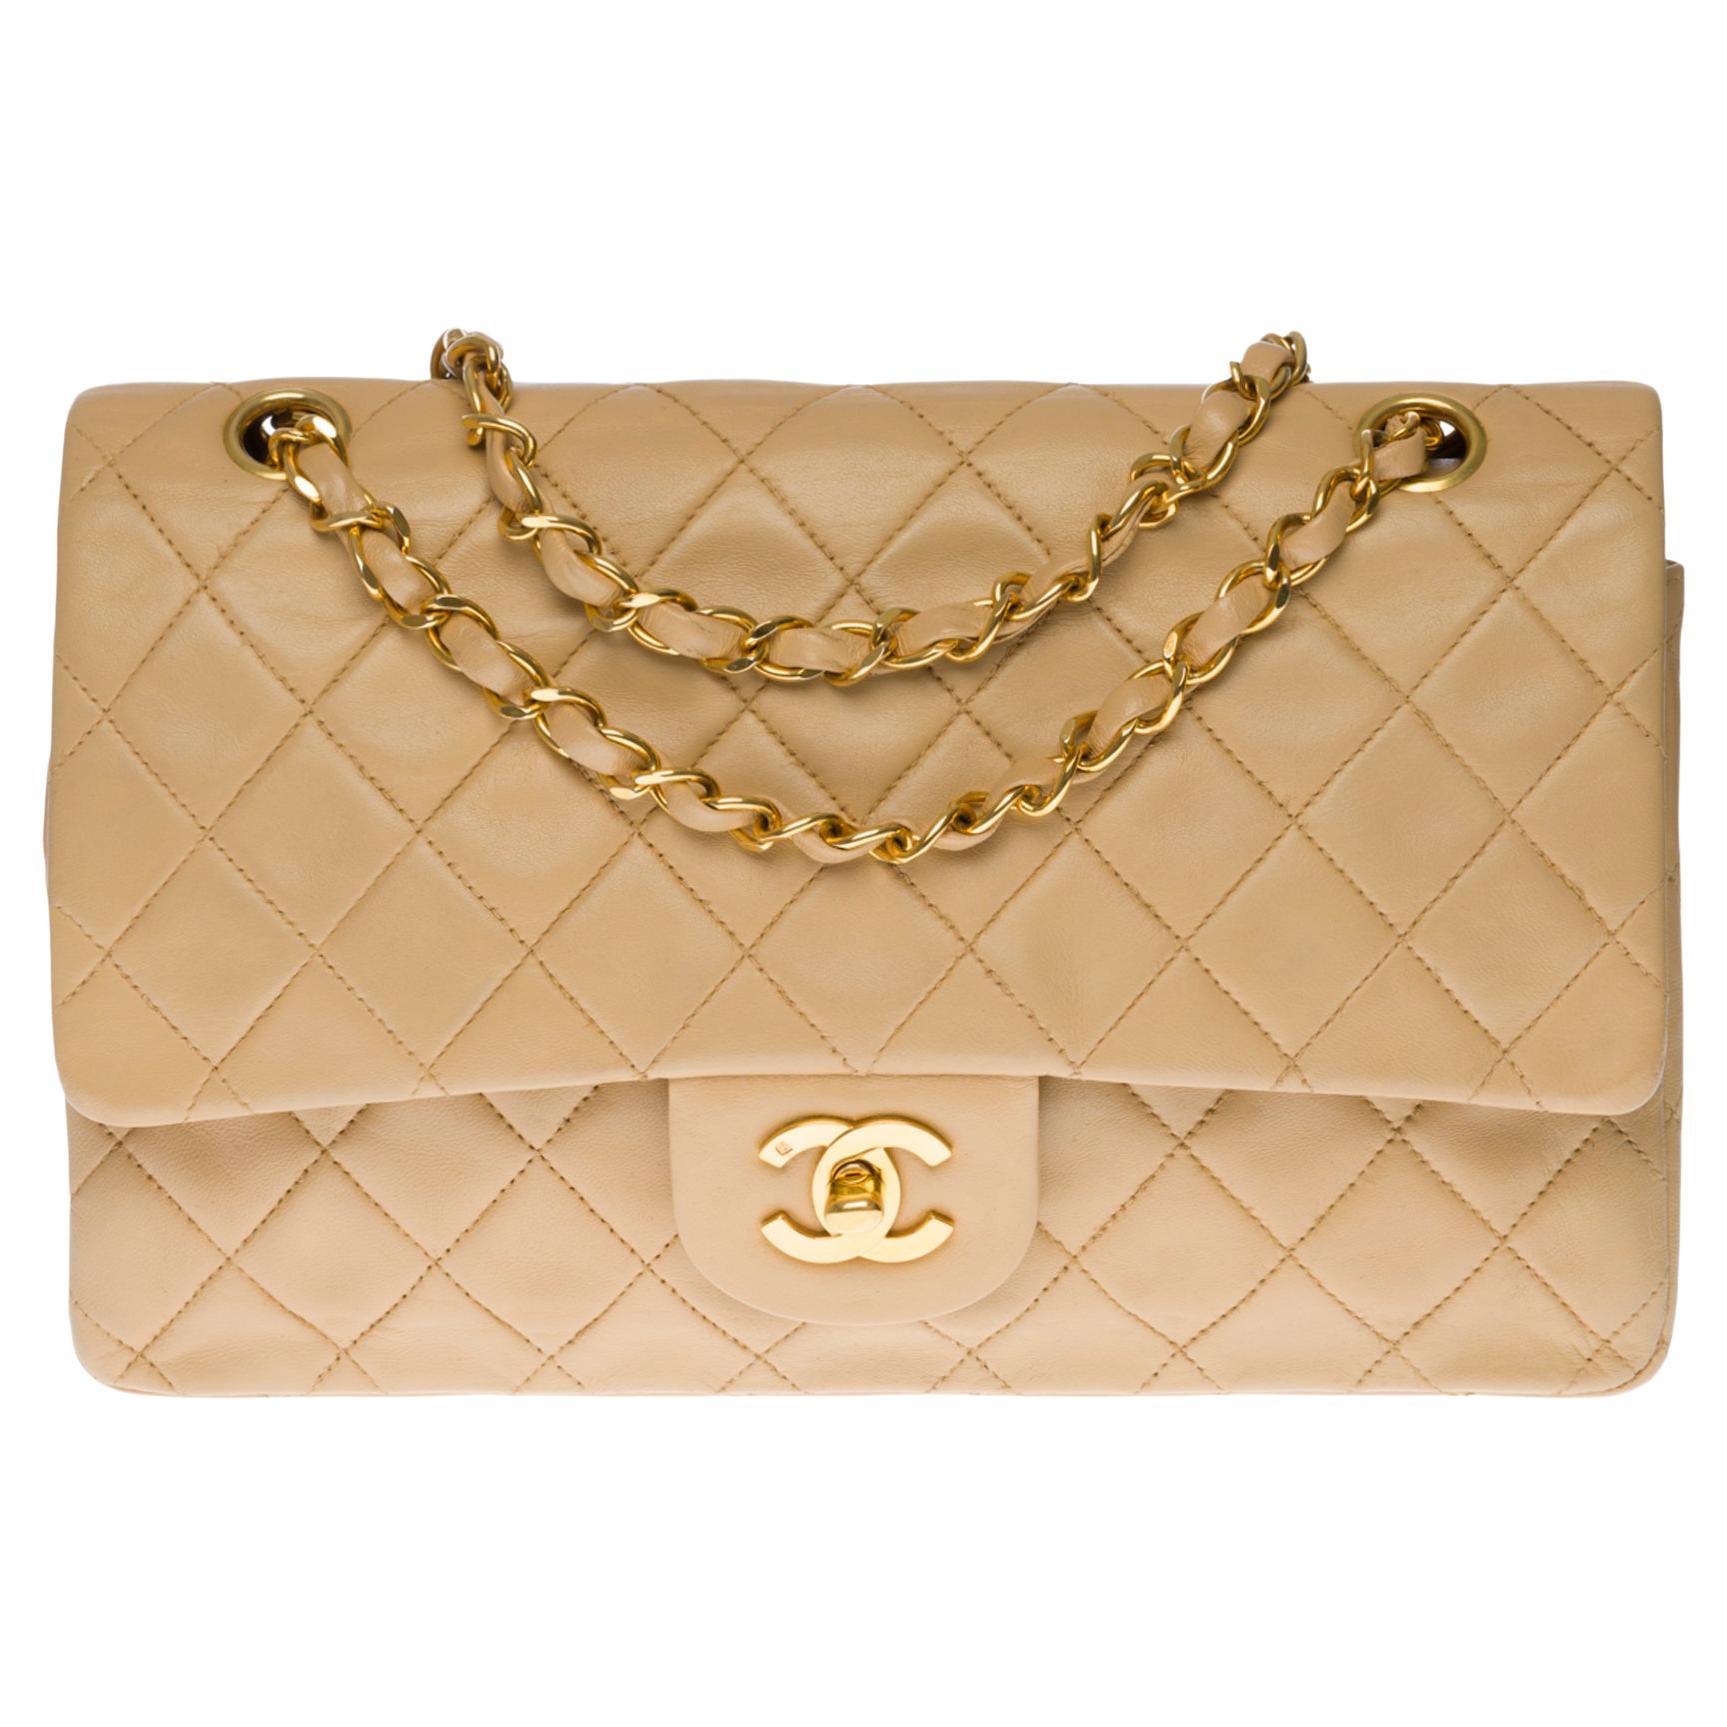 Chanel Timeless/Classic double Flap shoulder bag in beige quilted